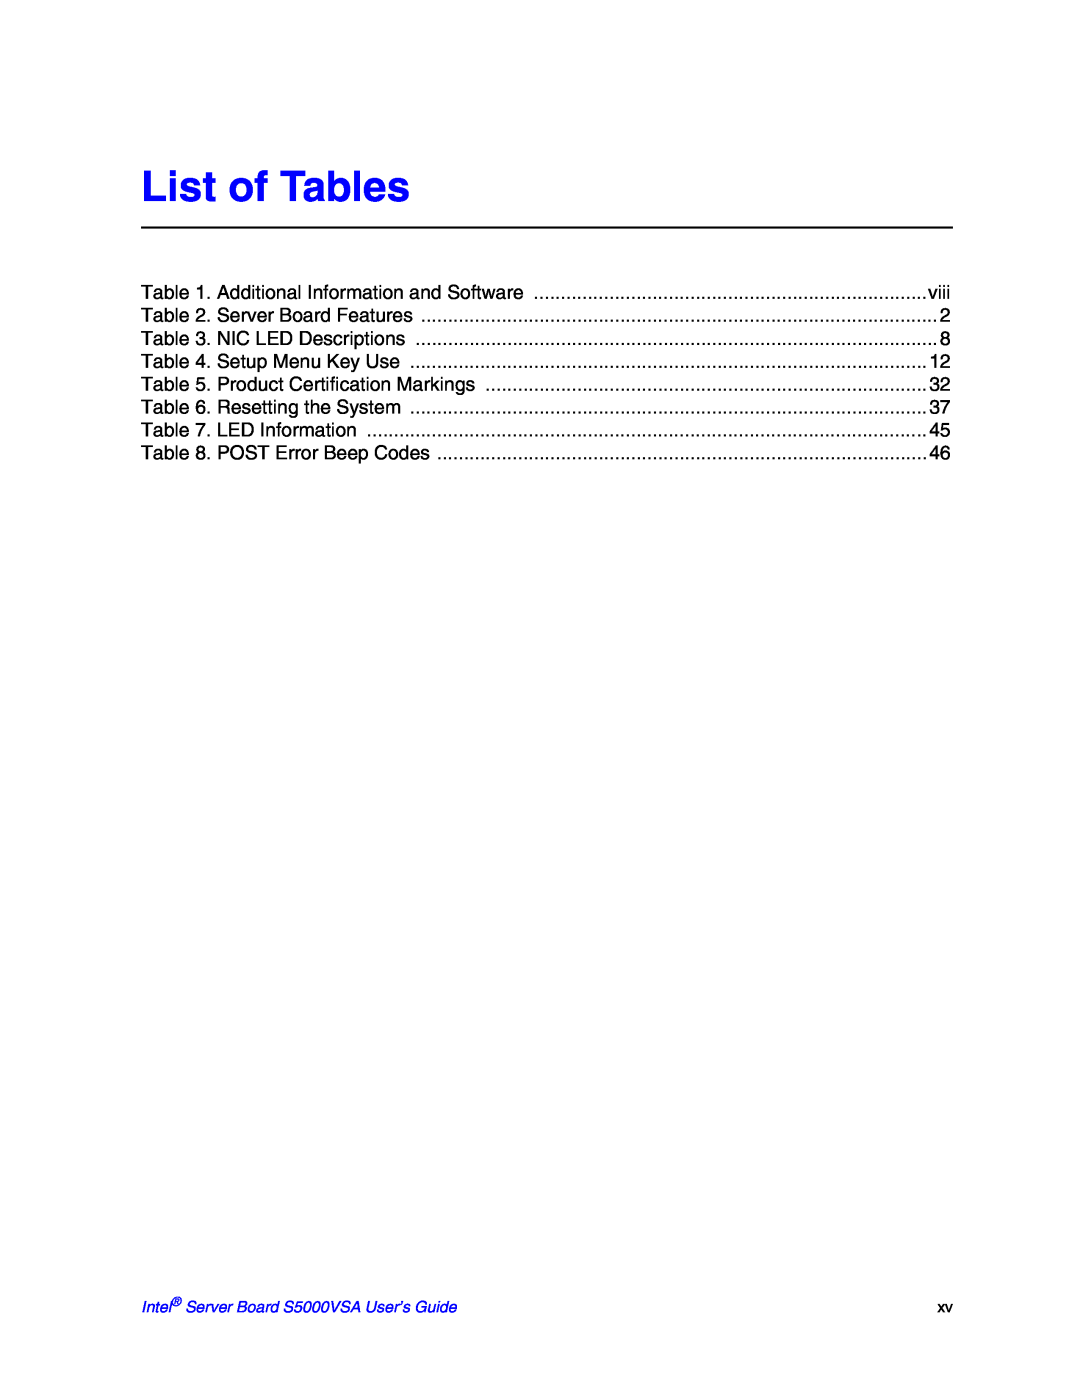 Intel S5000VSA List of Tables, Additional Information and Software, viii, Server Board Features, NIC LED Descriptions 